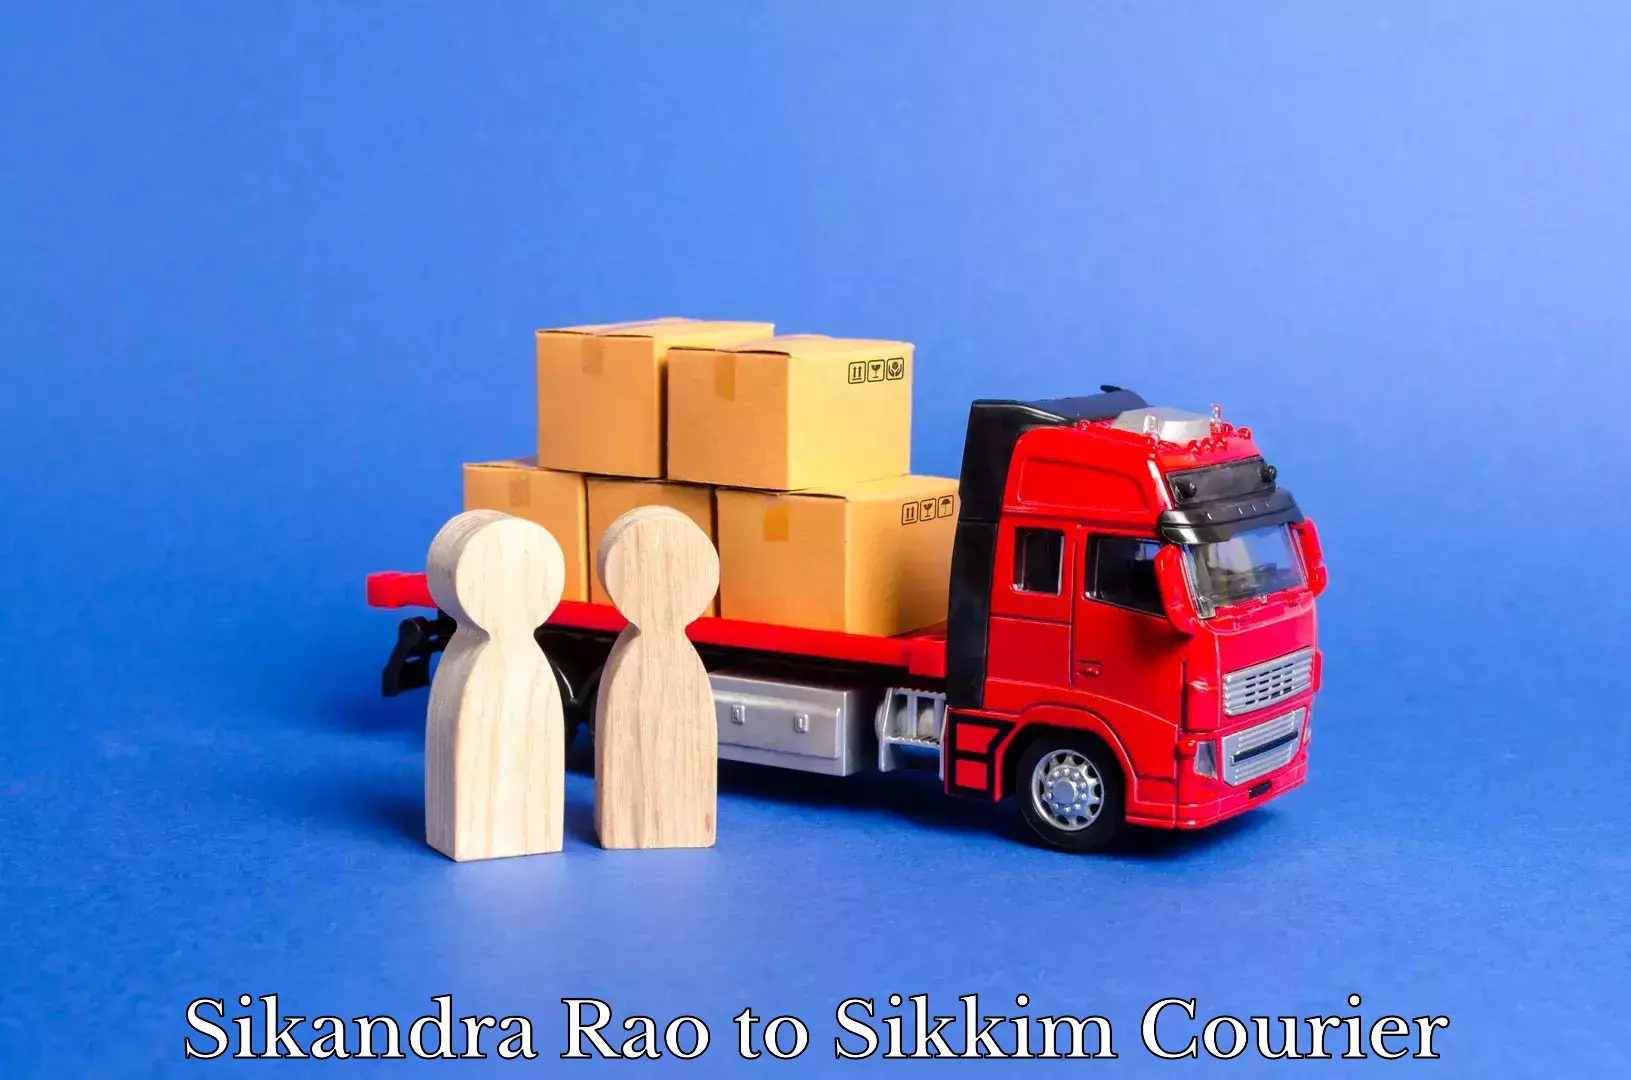 Postal and courier services Sikandra Rao to Sikkim